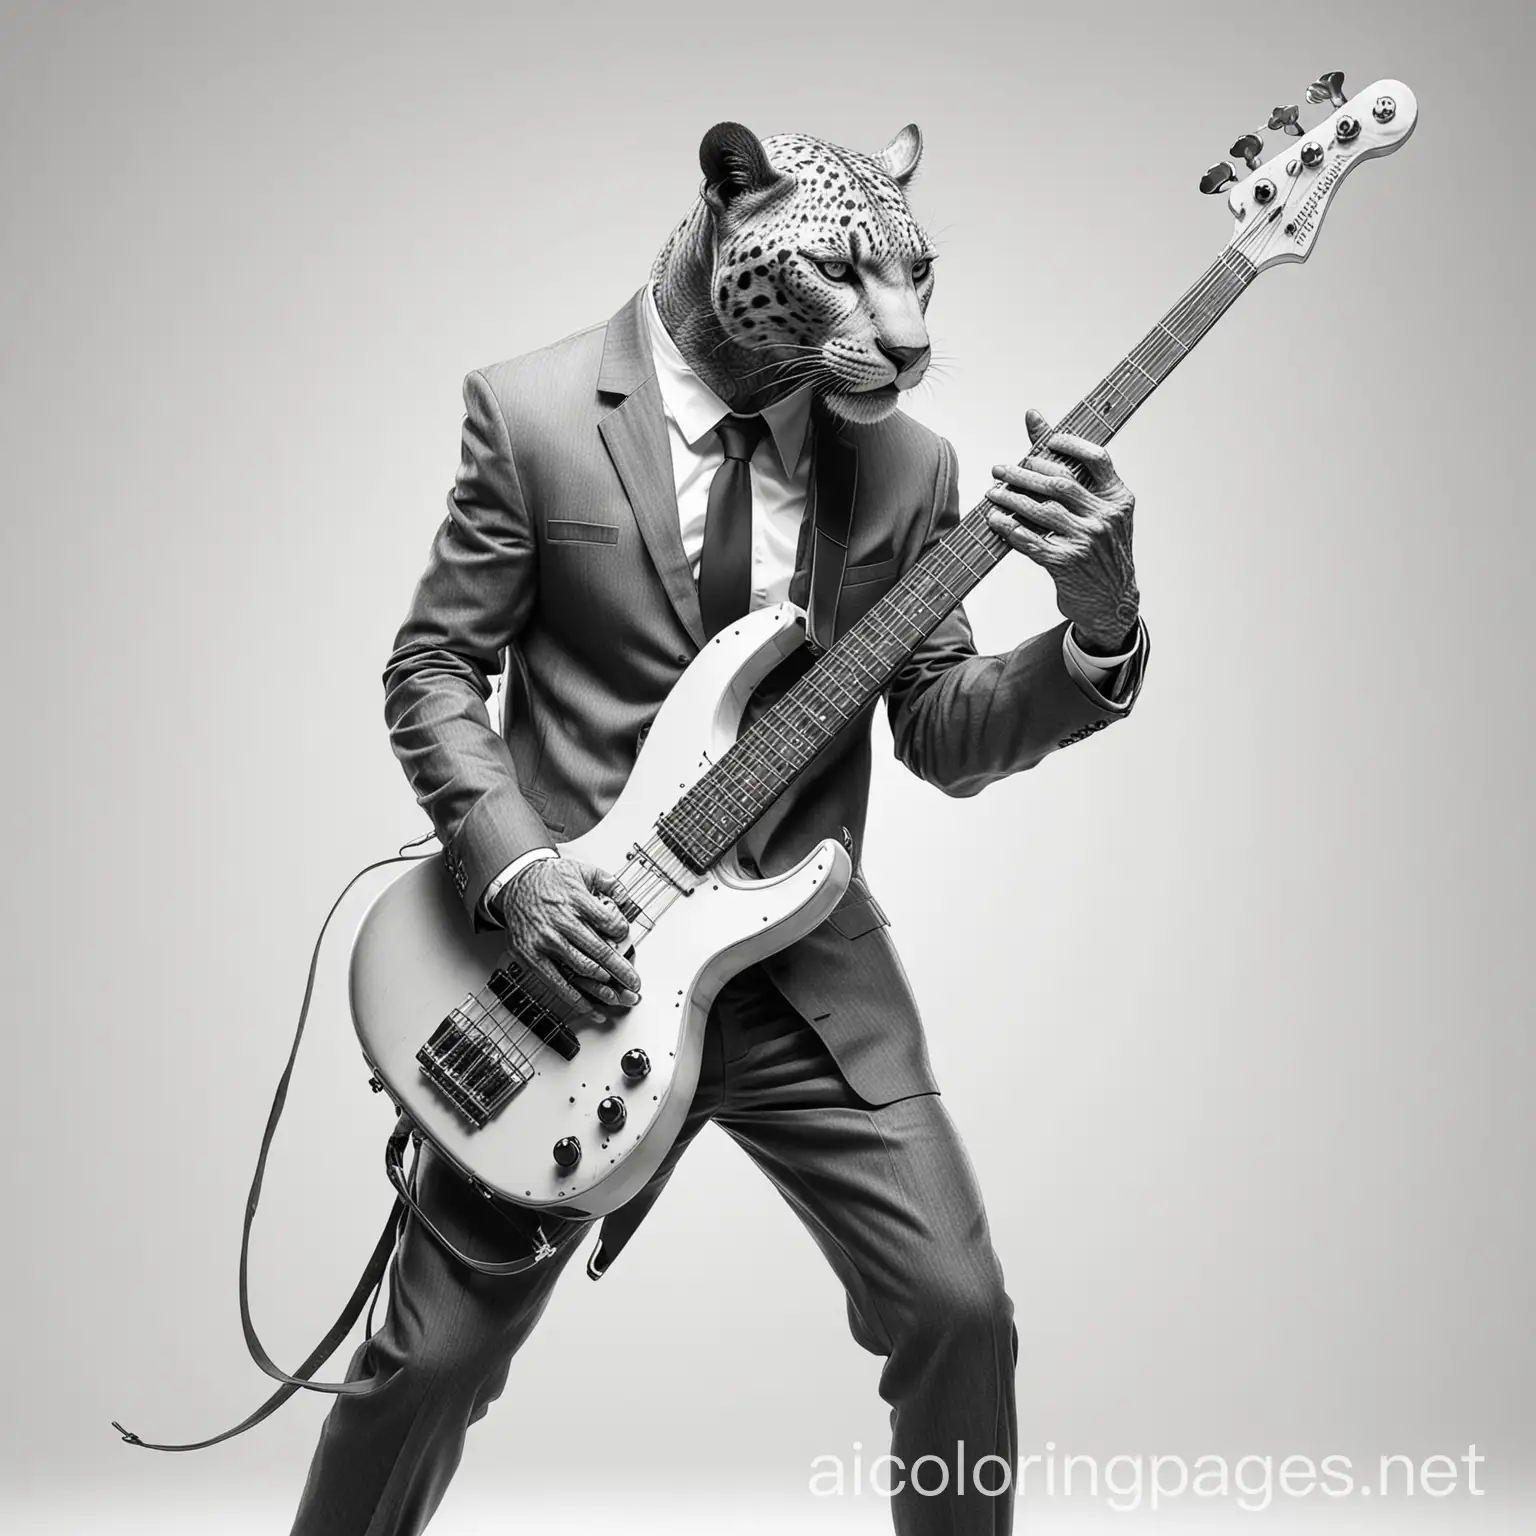 panther person in a suit playing a bass guitar, Coloring Page, black and white, line art, white background, Simplicity, Ample White Space. The background of the coloring page is plain white to make it easy for young children to color within the lines. The outlines of all the subjects are easy to distinguish, making it simple for kids to color without too much difficulty